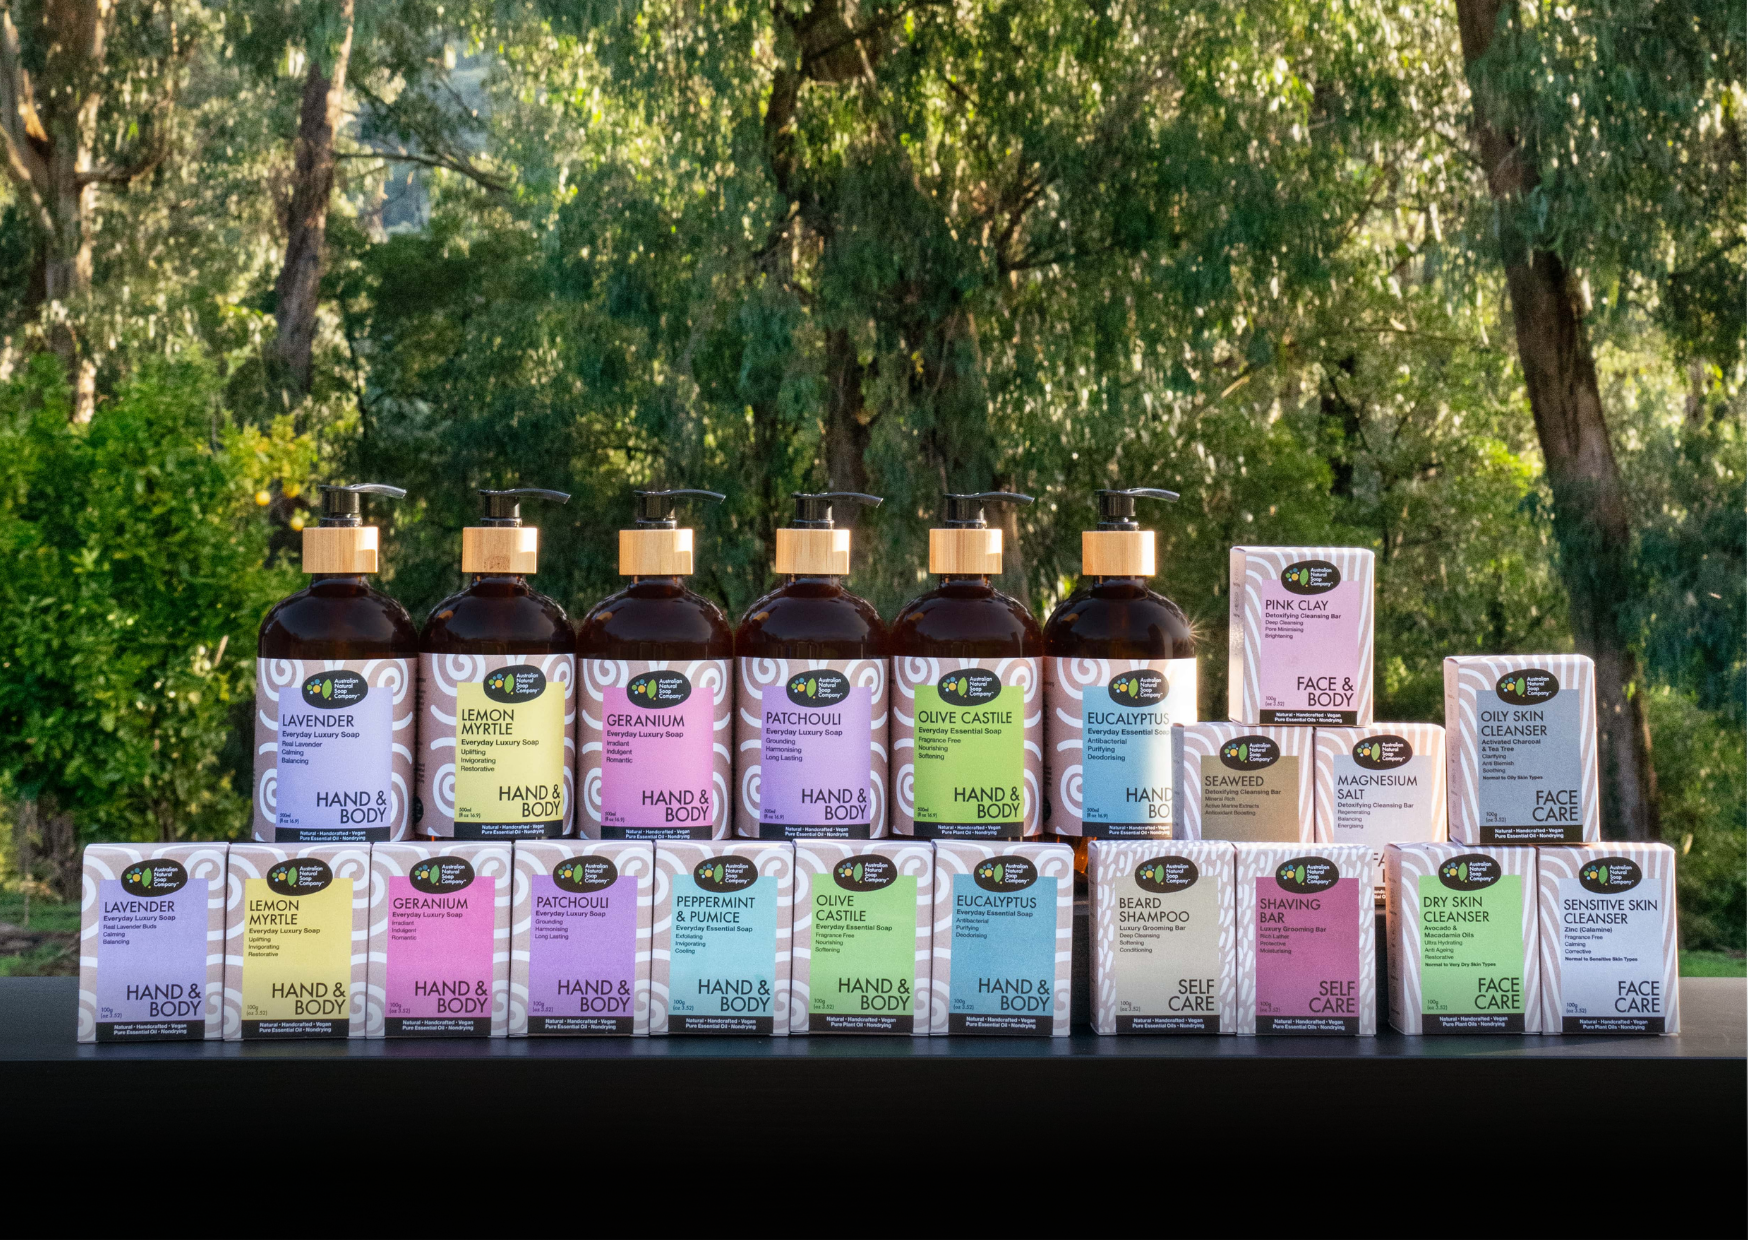 The Australian Natural Soap Company Range of products